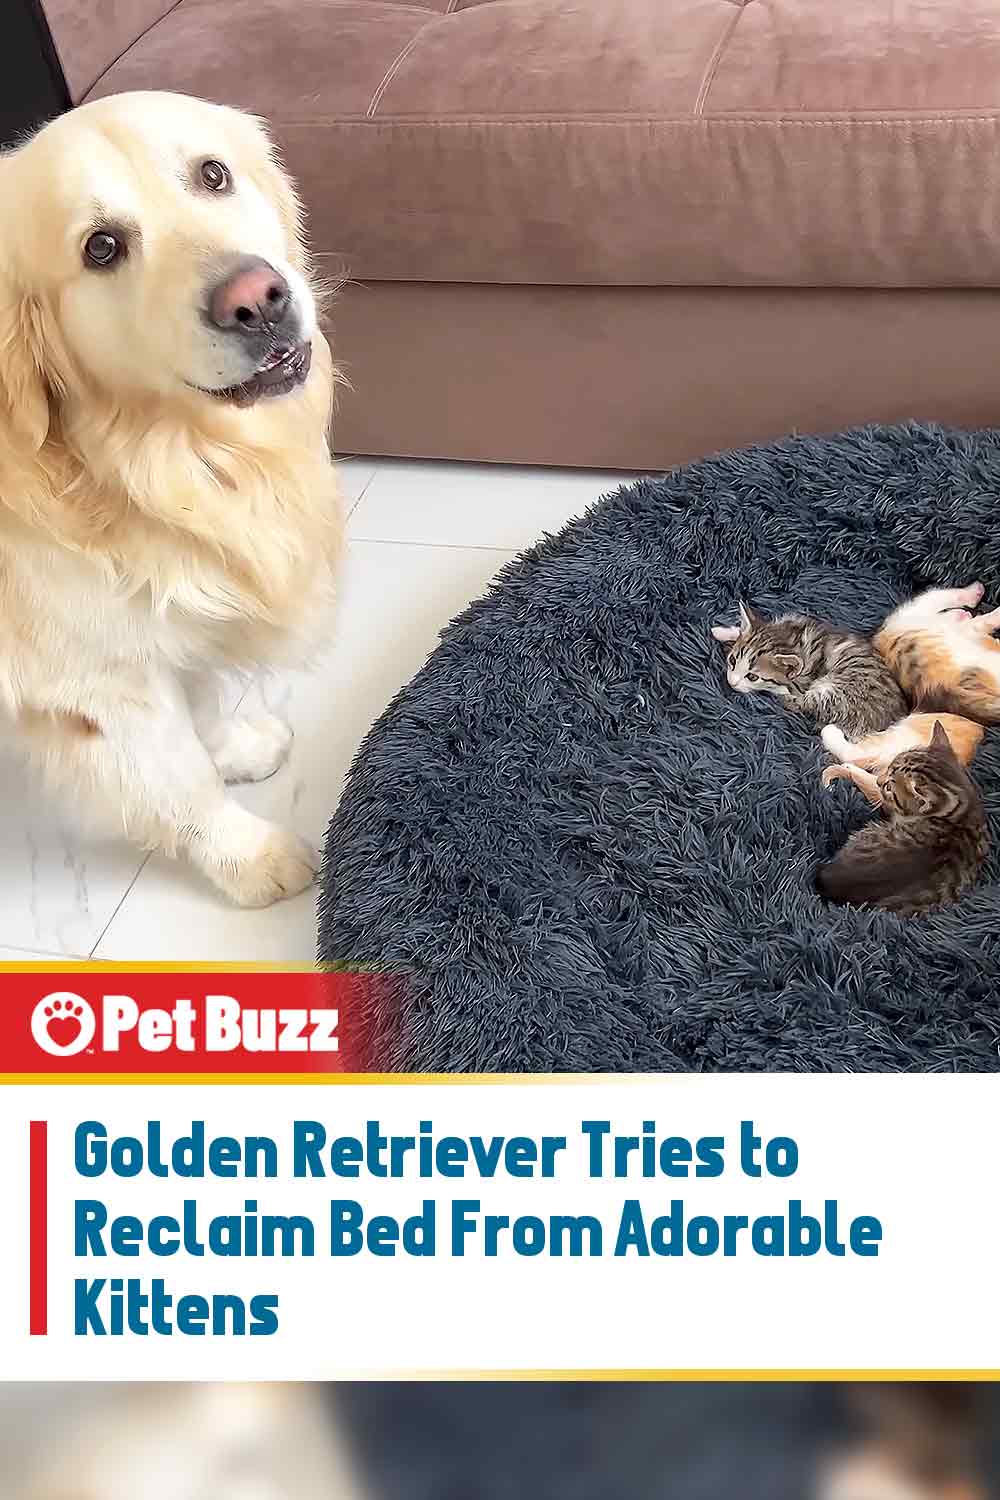 Golden Retriever Tries to Reclaim Bed From Adorable Kittens